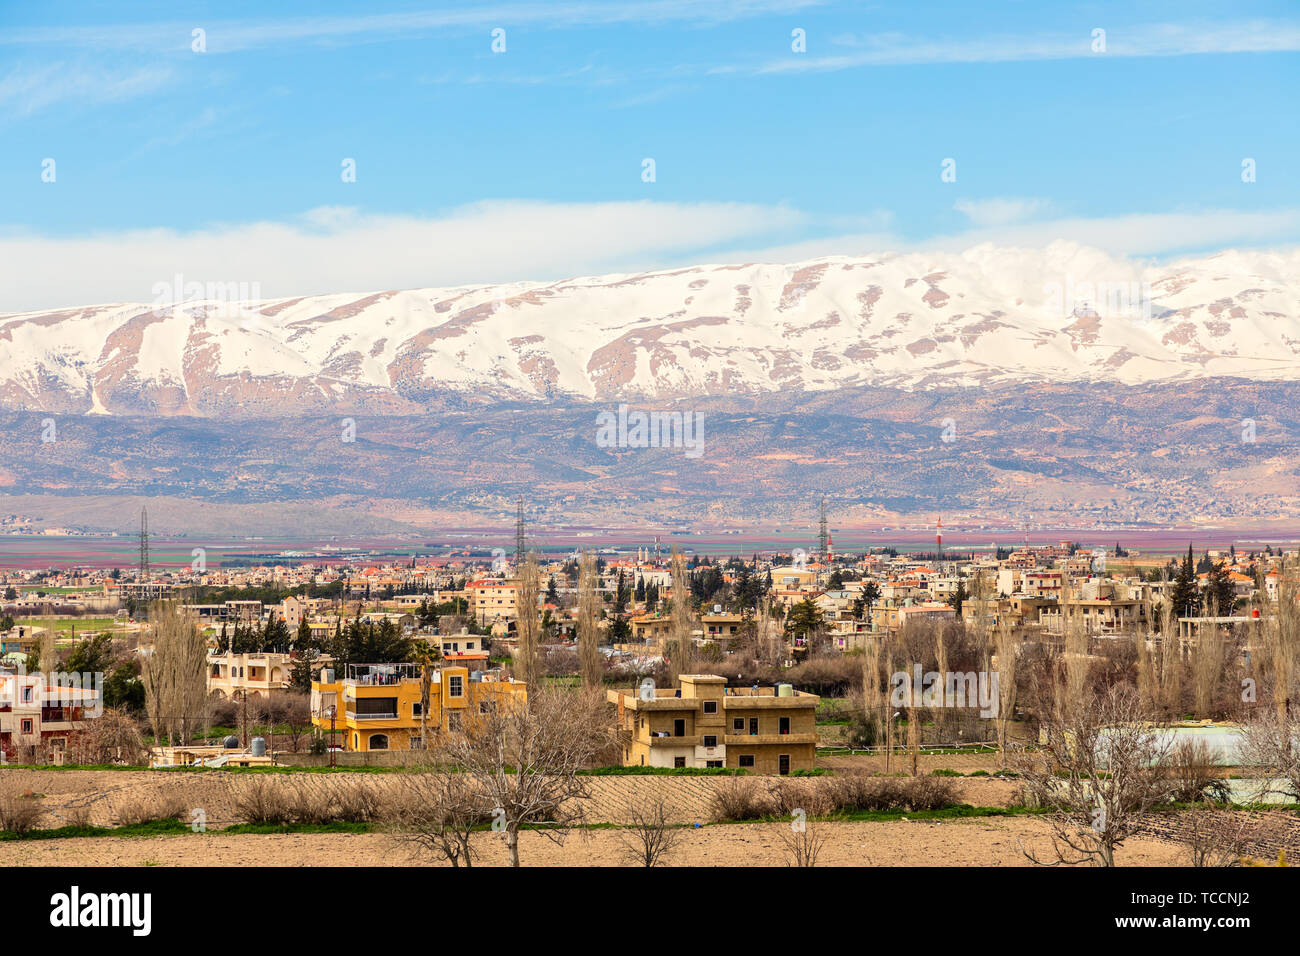 Lebanese houses in Beqaa Valley with snow cap mountains in the background, Baalbeck, Lebanon Stock Photo